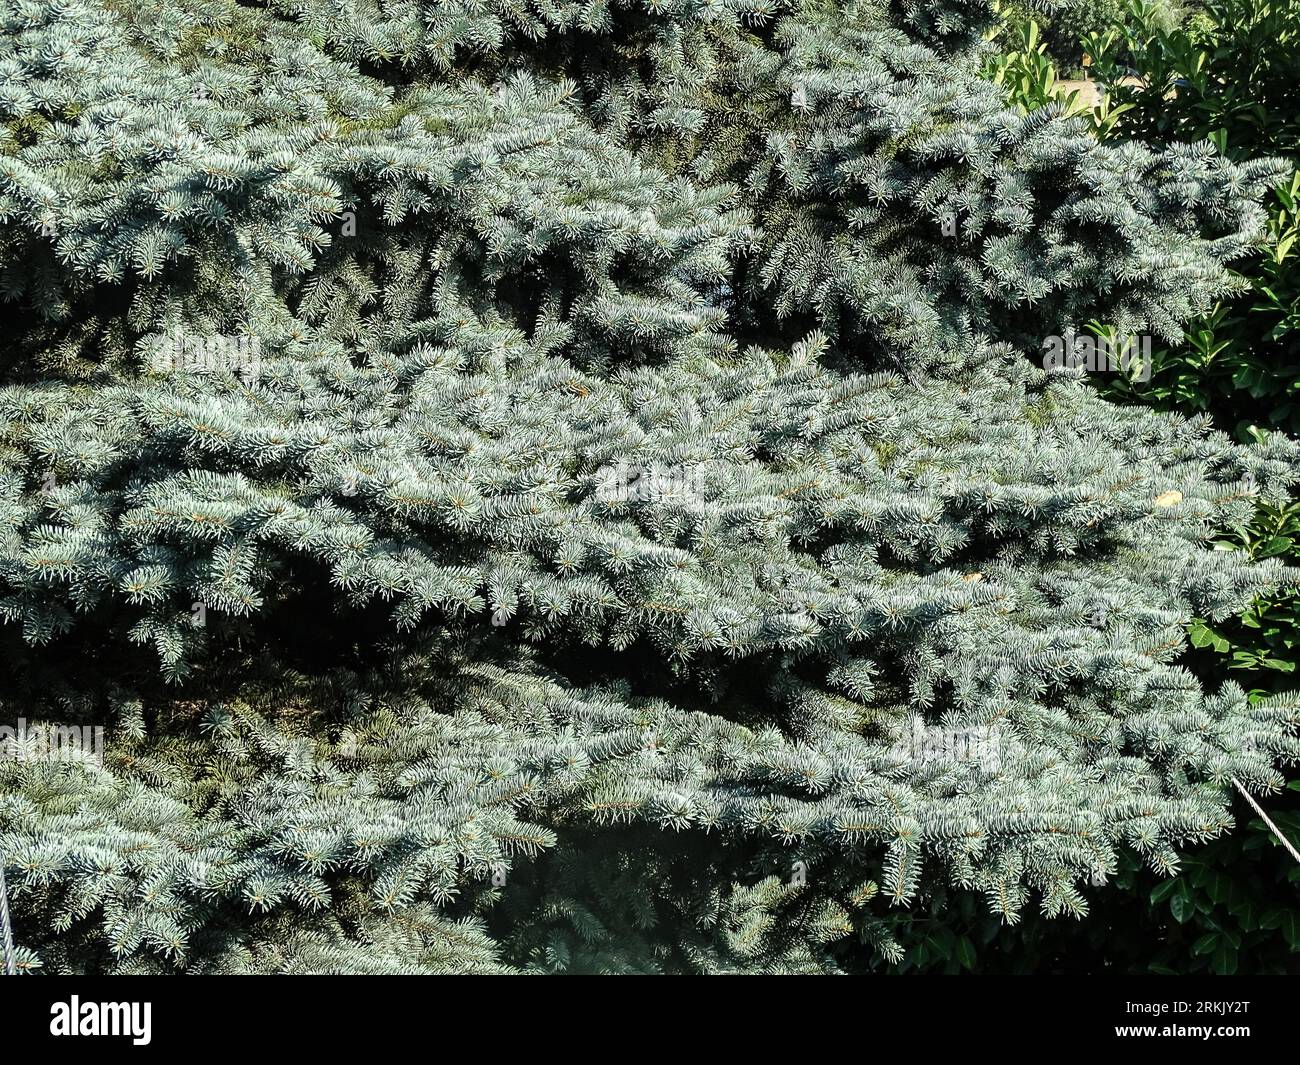 Colorado Blue Spruce tree in Romania. Picea pungens Stock Photo